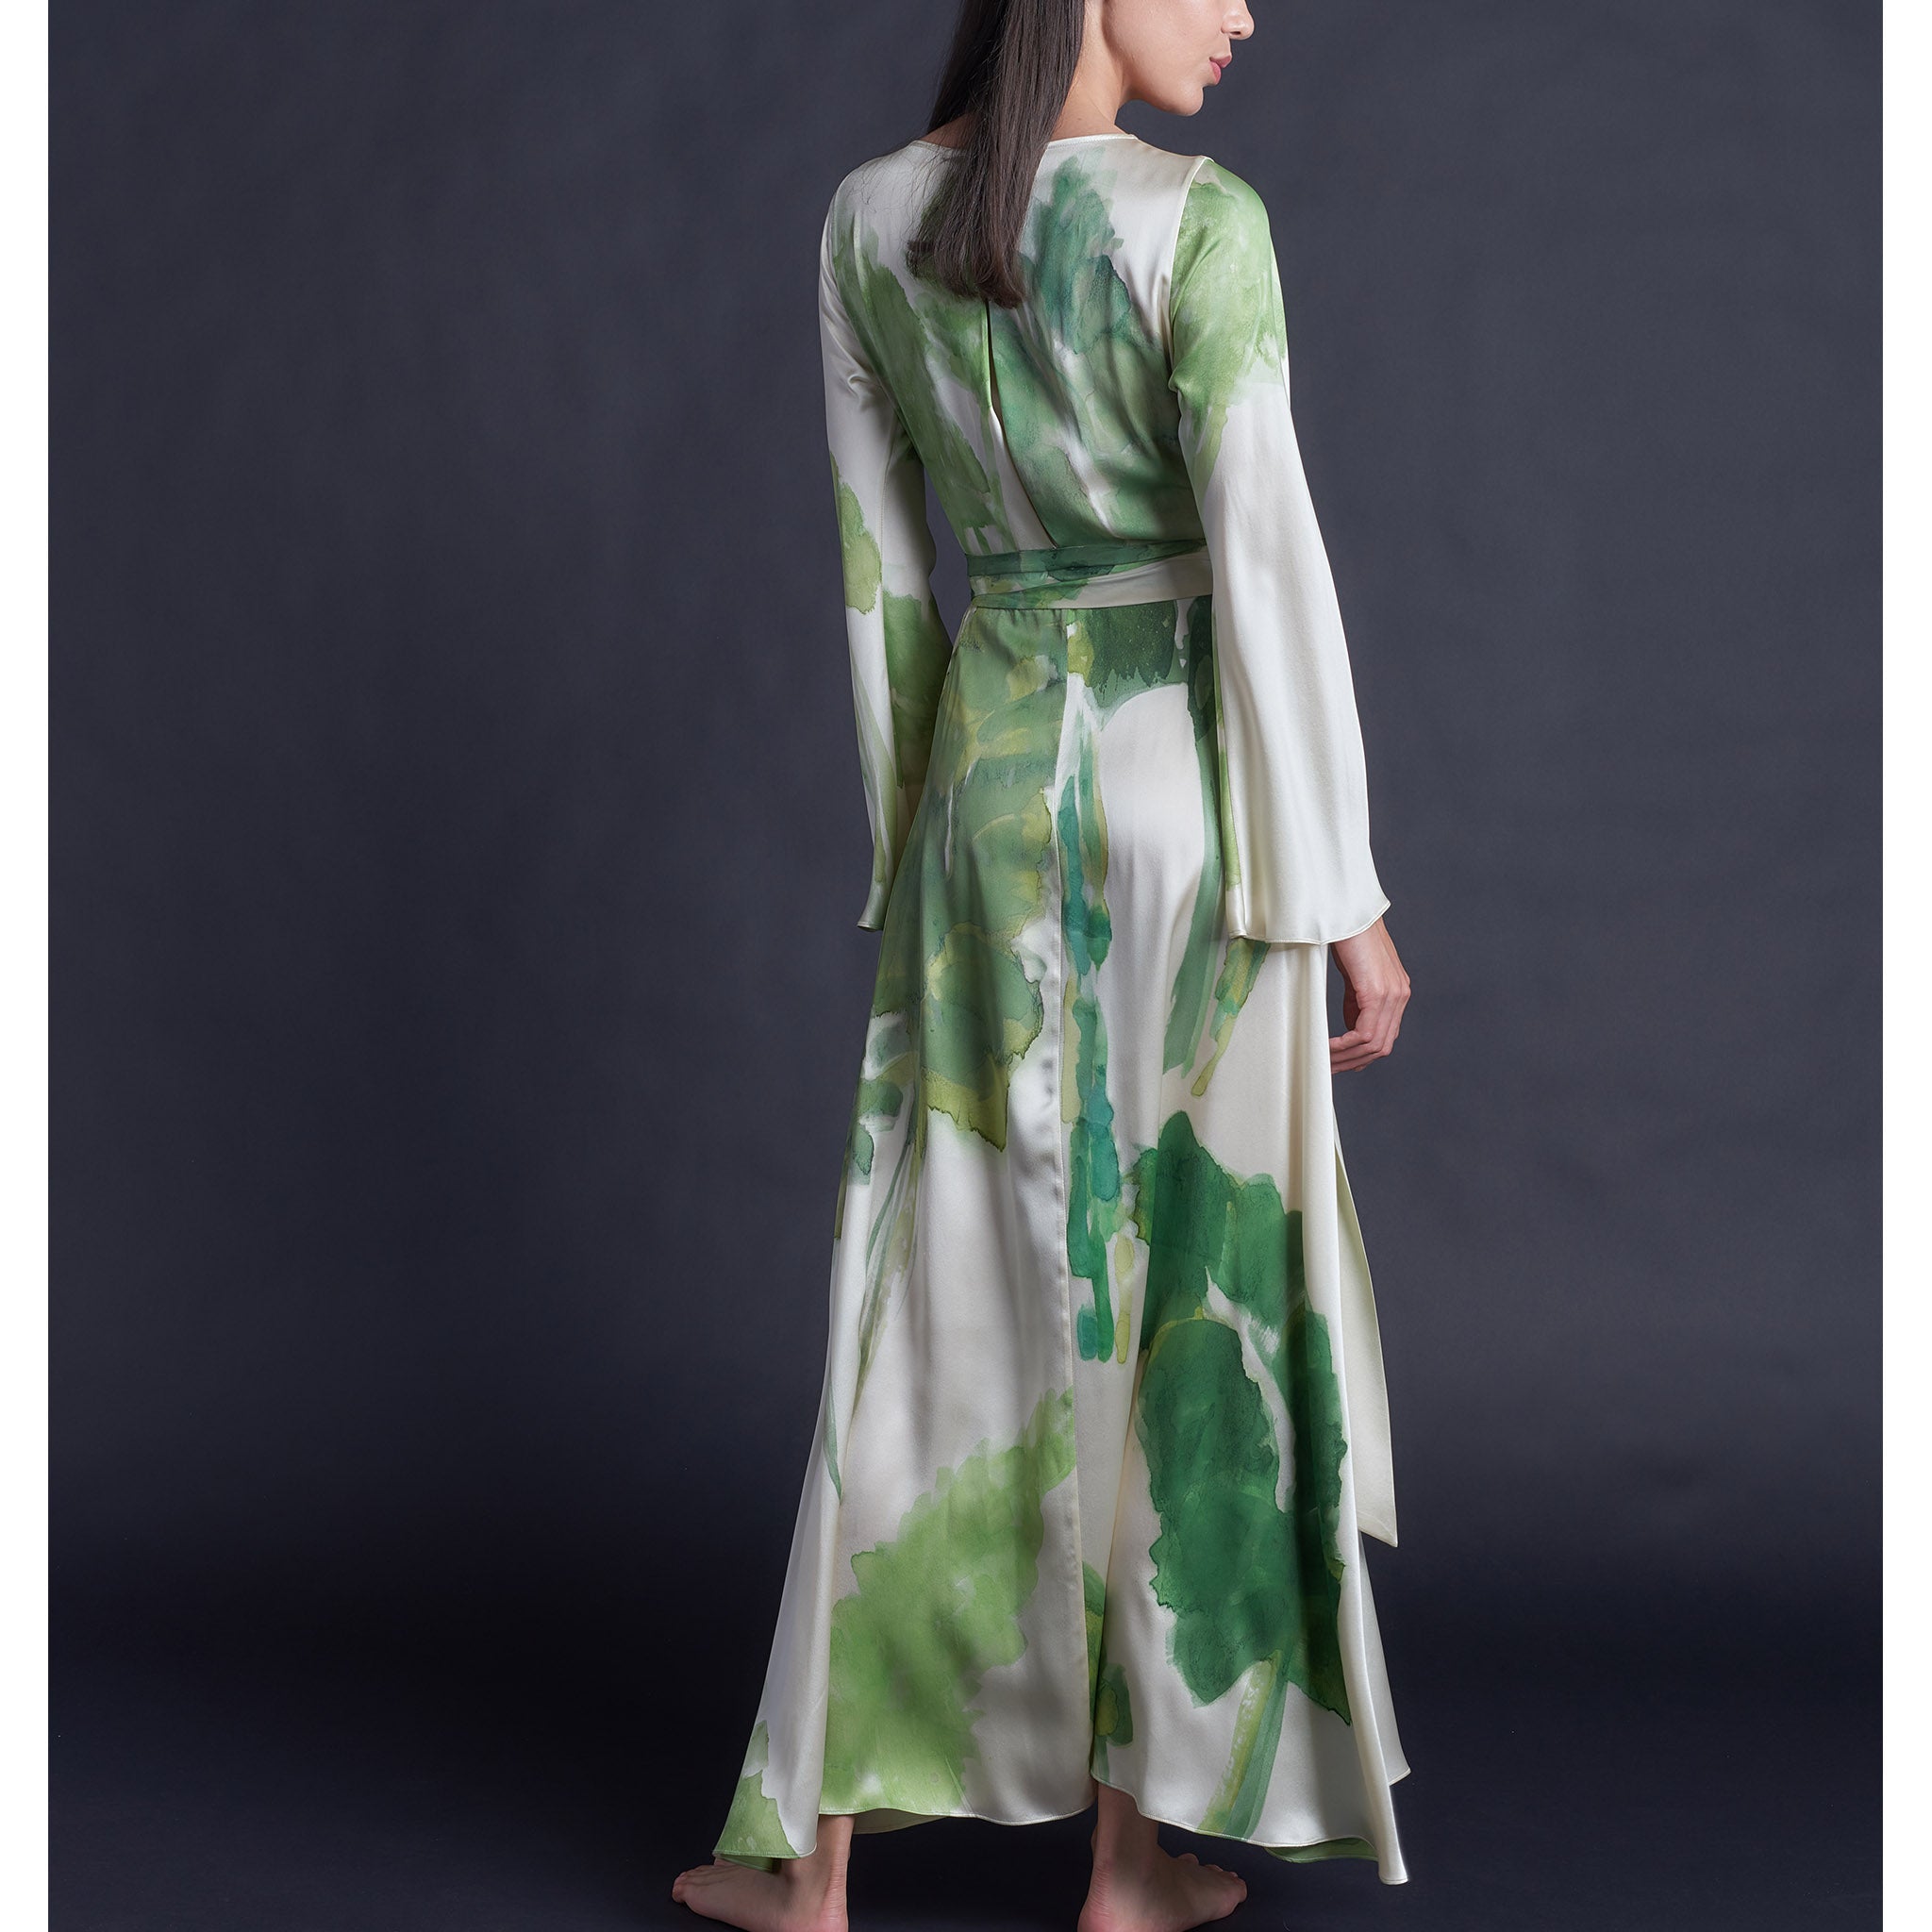 One of a Kind Hand Painted Iris Silk Satin Dressing Gown